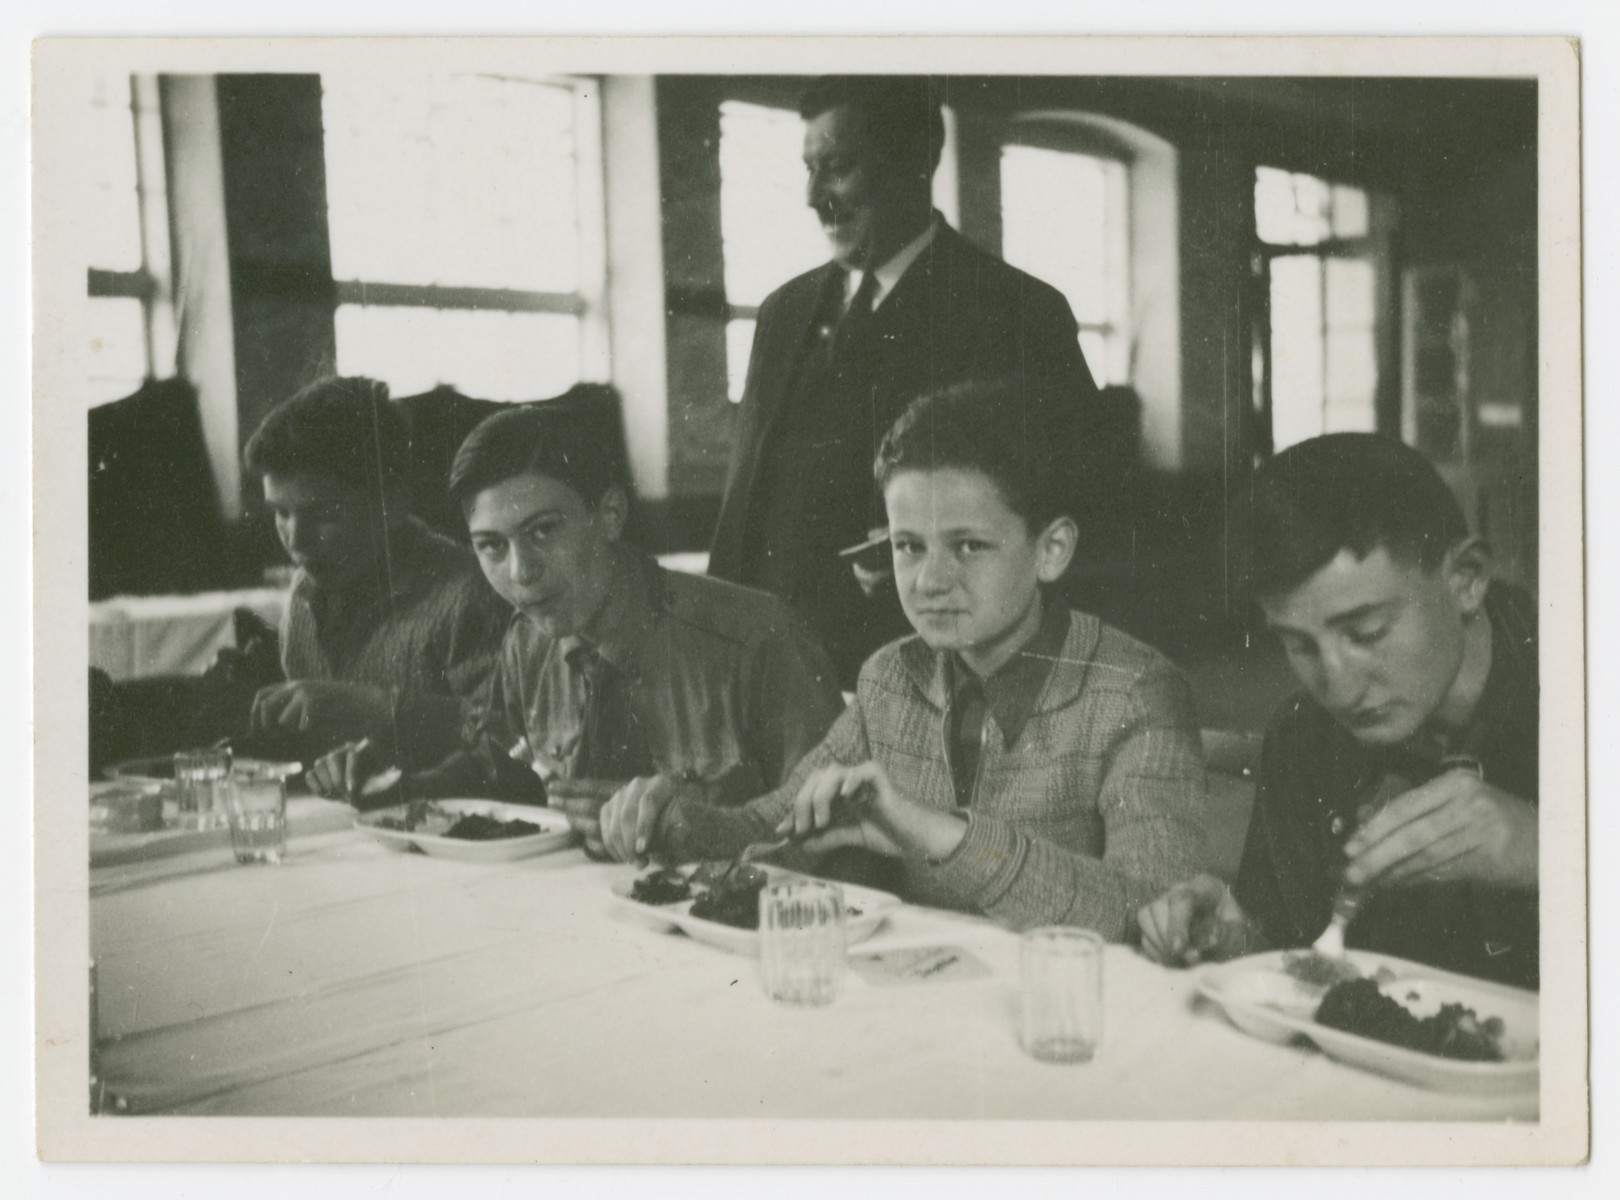 An Austrian boy scout troop shares a meal.

Hans Morawetz is pictured in the center.